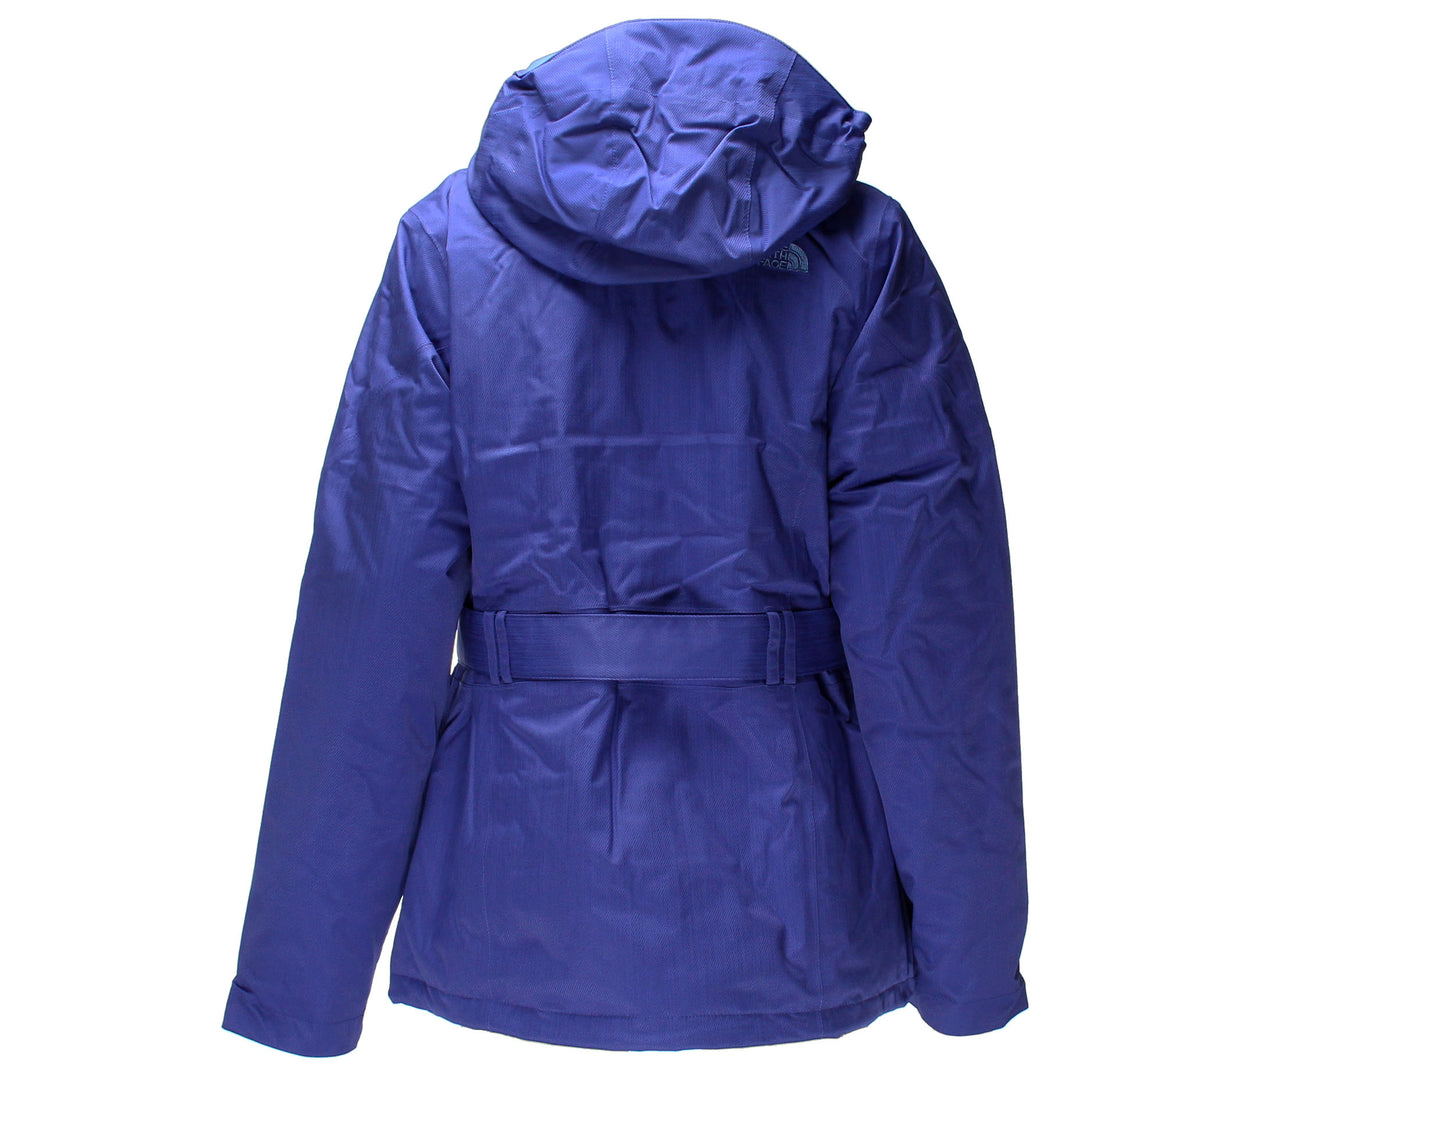 The North Face Get Down Women's Jacket